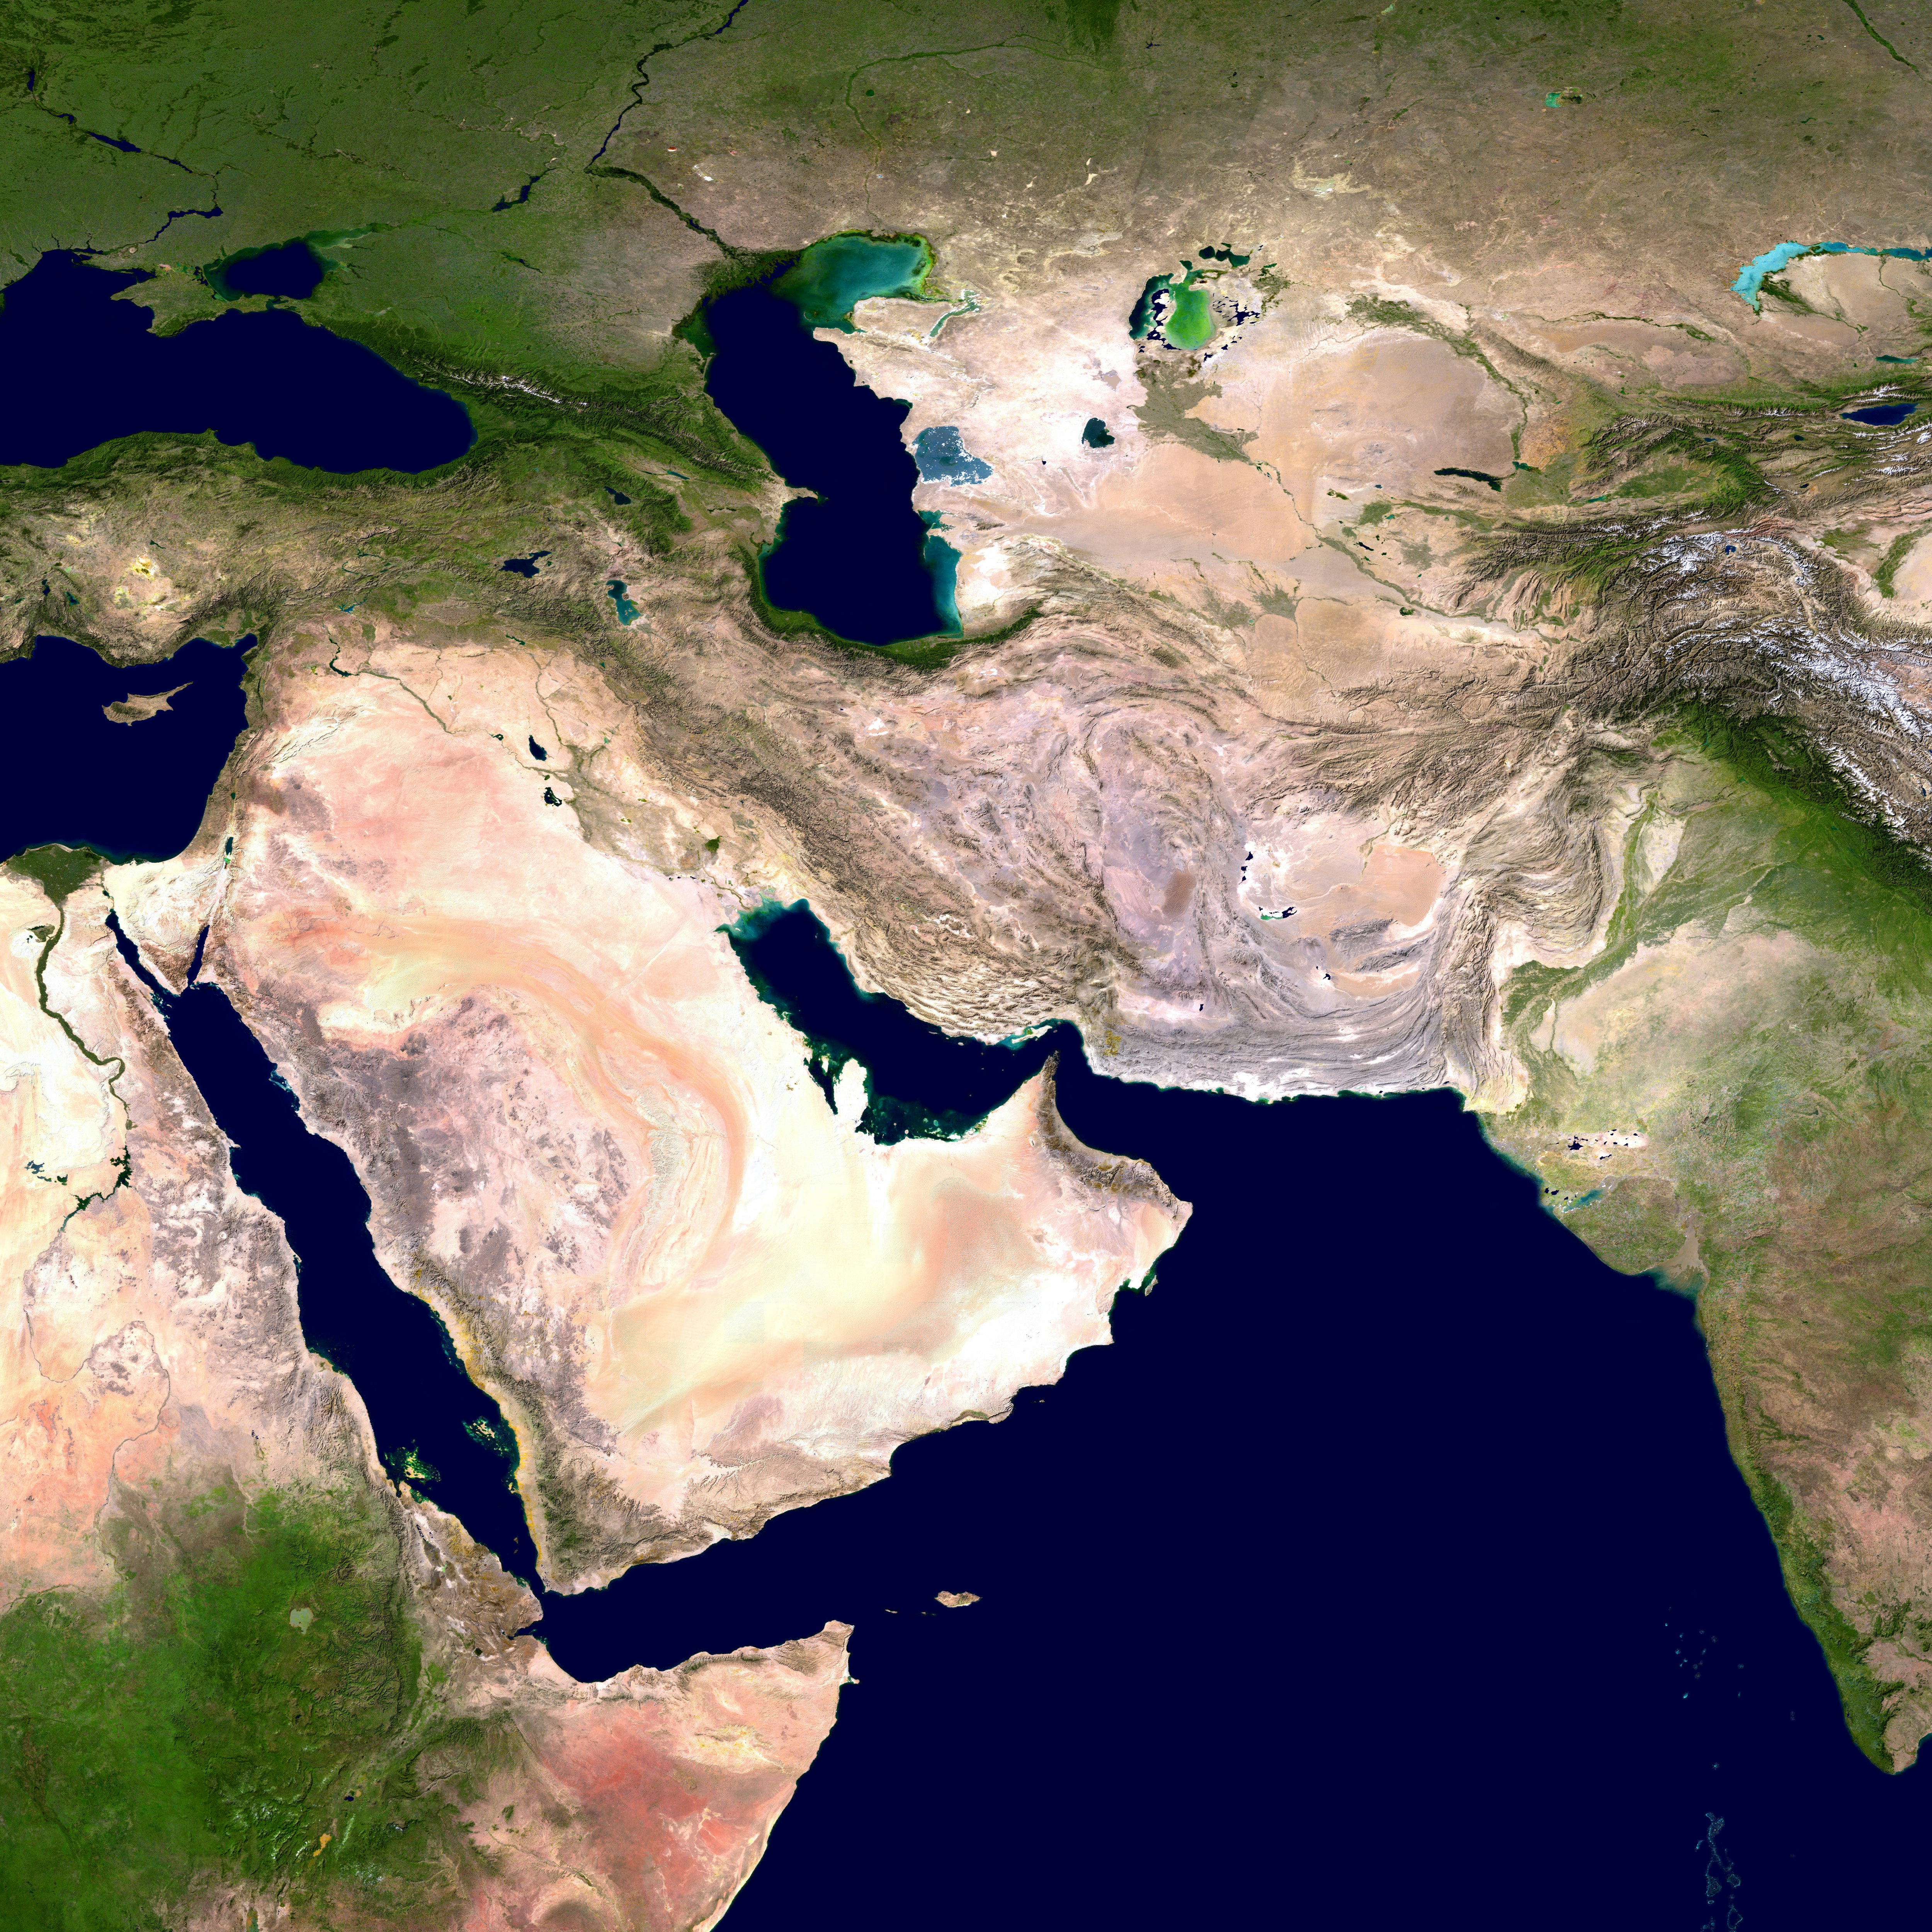 Western Asia, the world's largest continent, occupies one-third of the Earth's landmass. Although divisions are somewhat arbitrary, Western Asia encompasses the Middle East and countries that surround the Caspian Sea, including Kazakhstan and Russia.